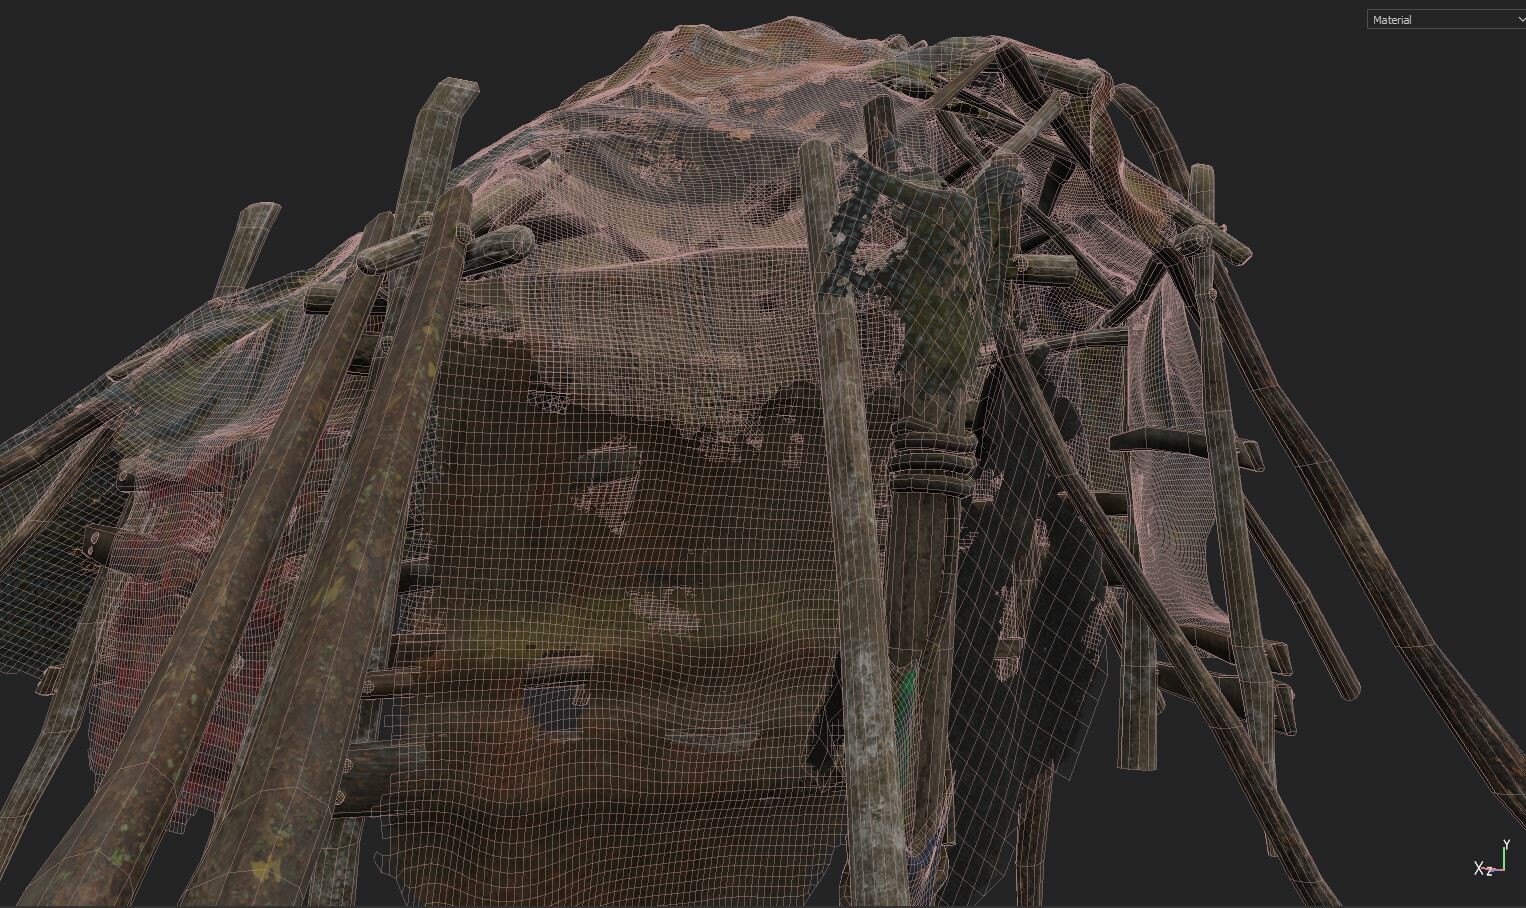 The Hut - Wire frame| It is a hero asset so it is dense in poly count. The overall scene was small, so I didn't care about trying to reduce the polys where it is not needed. But, if optimizing the performance was an issue, I would do a poly reduction pass